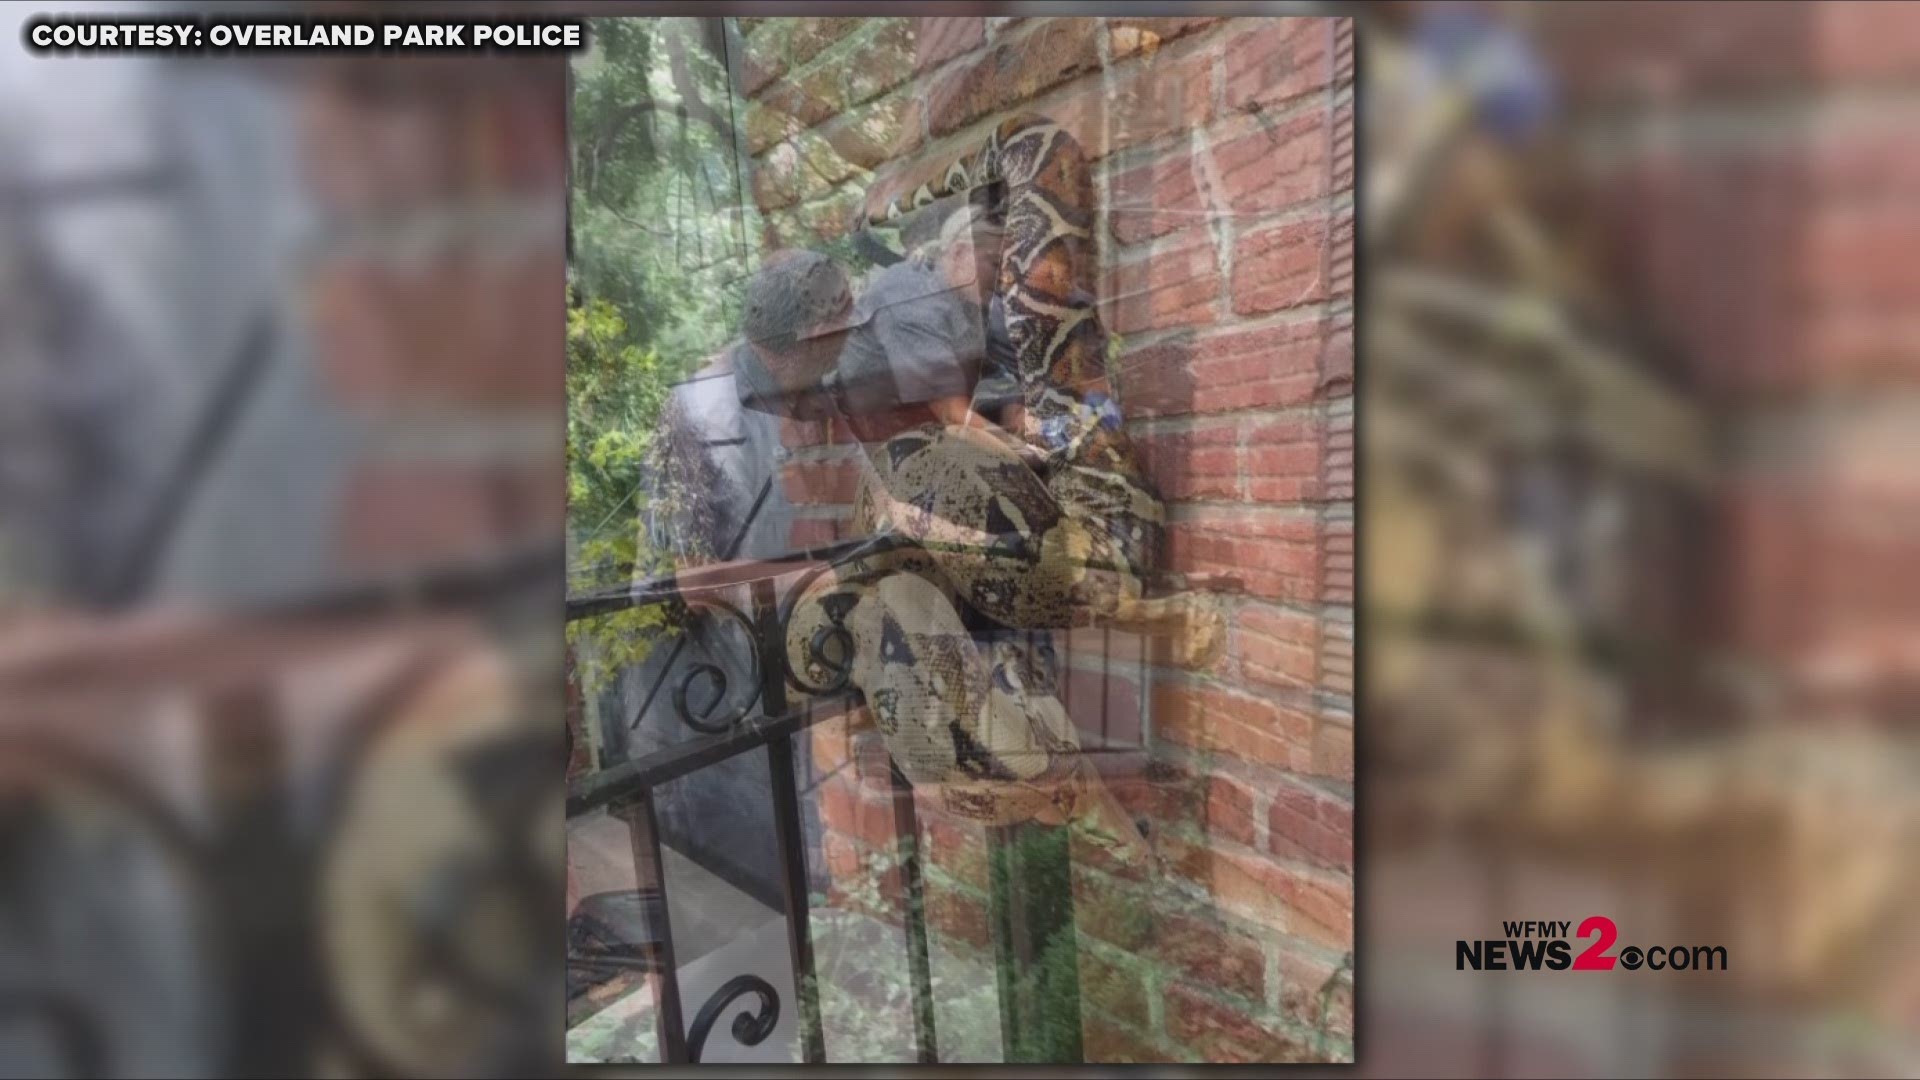 Yikes! A postal worker had to call animal control after finding a python on someone's mailbox!